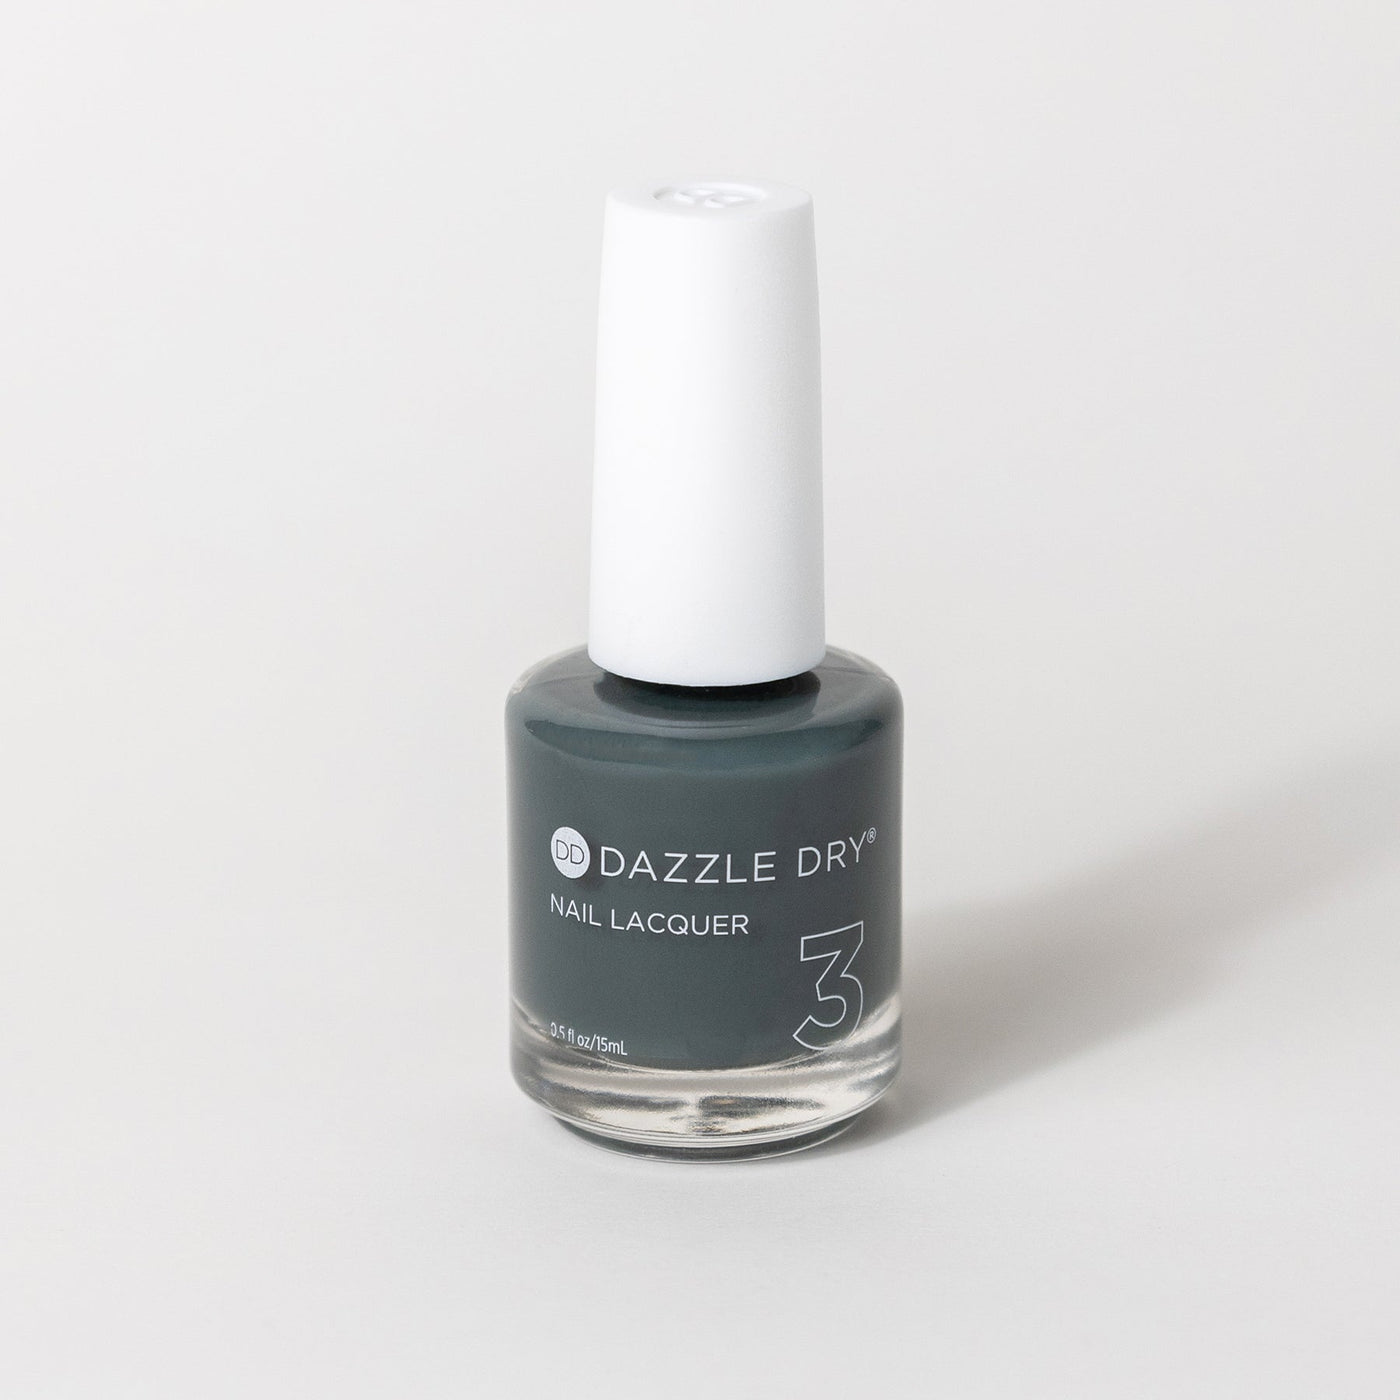 Northern Lights – Nail Lacquer by Dazzle Dry